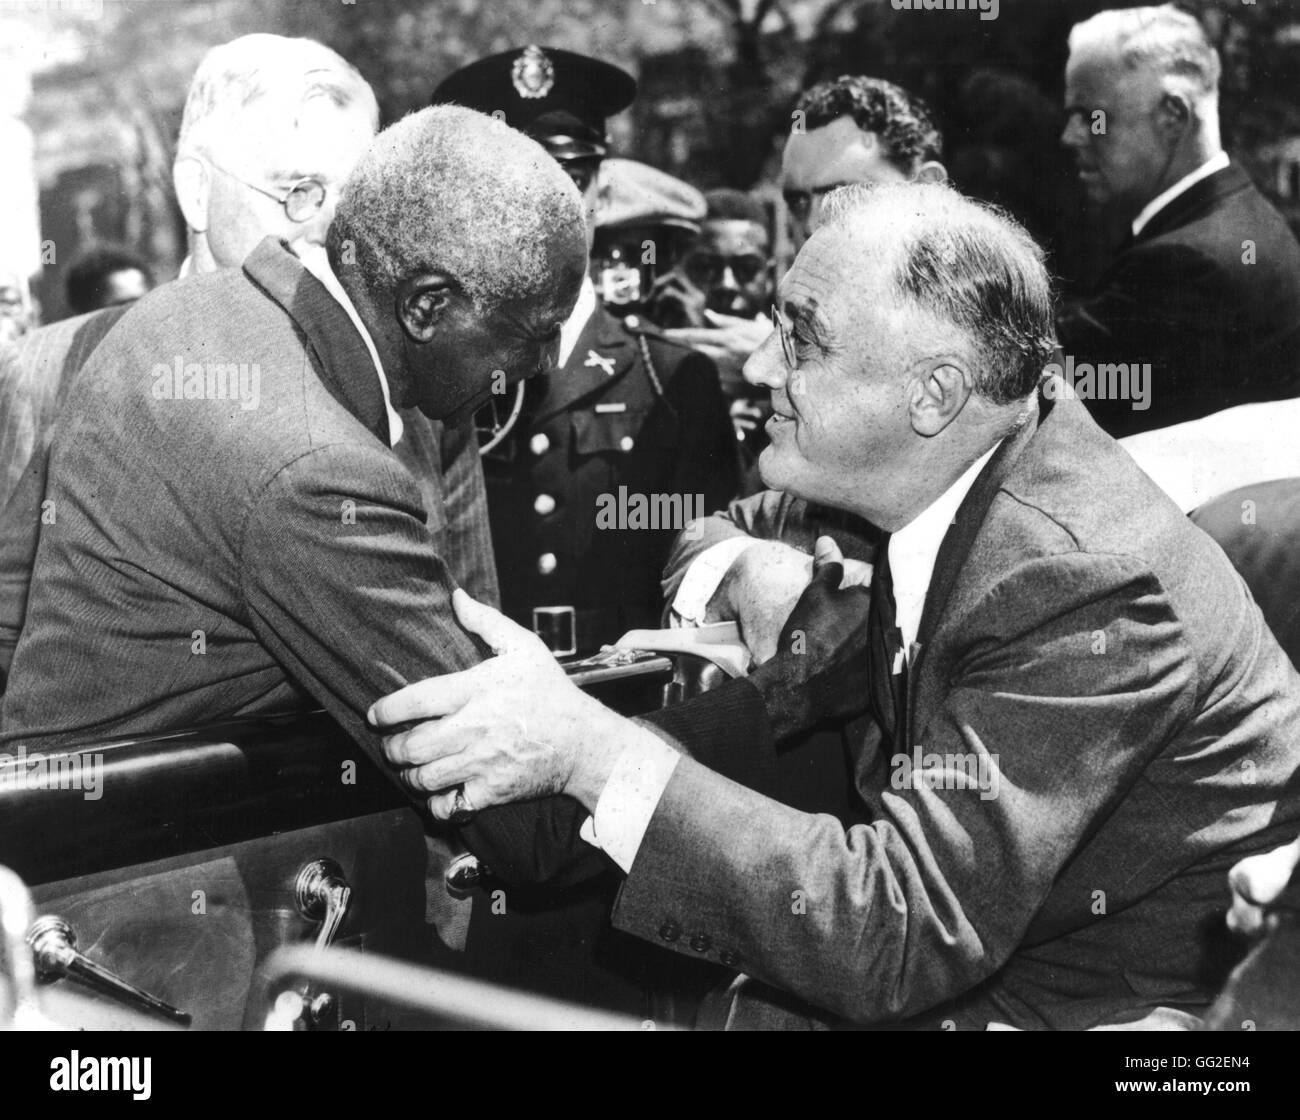 At Tuskegee institute, a black school founded by Booker T. Washington, Roosevelt is shaking hands with professor G.W. Carver, an eminent scientist in the field of agriculture. c.1935 United States Stock Photo